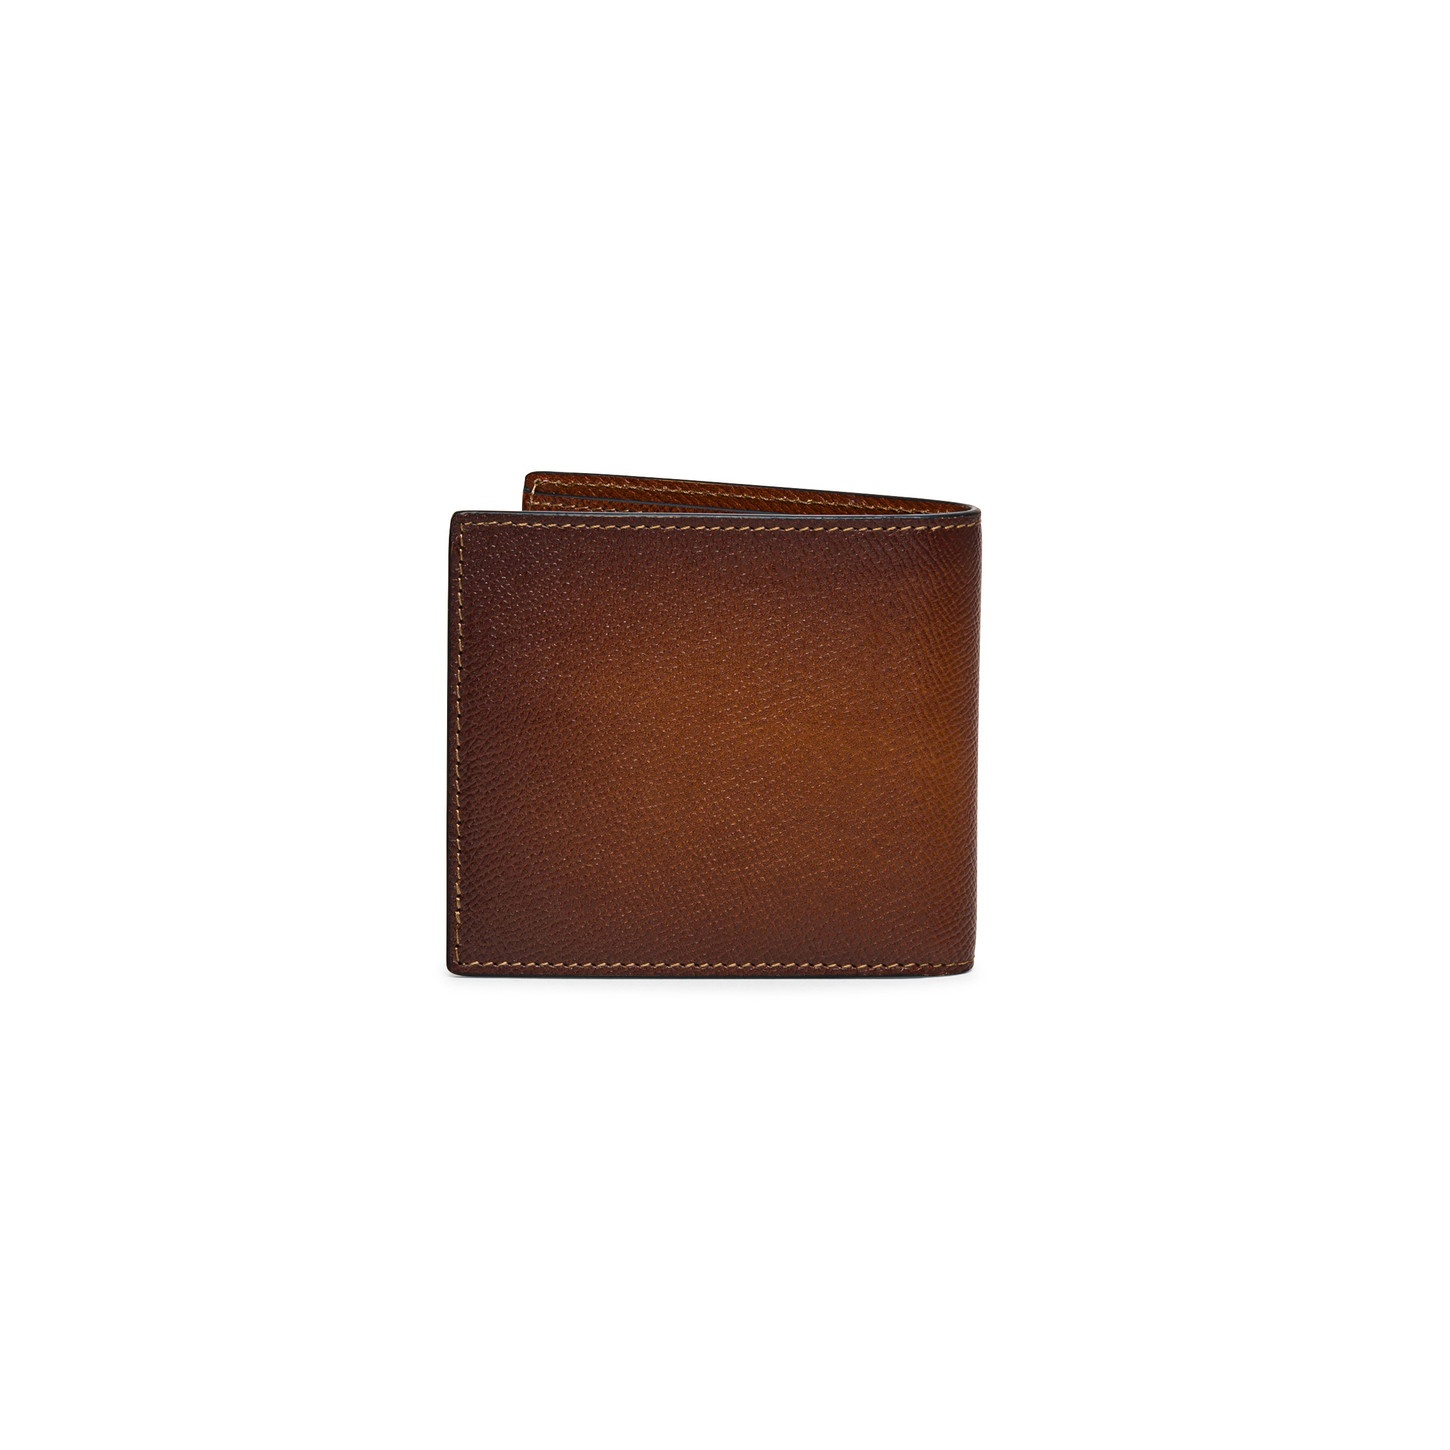 Brown saffiano leather wallet - 2